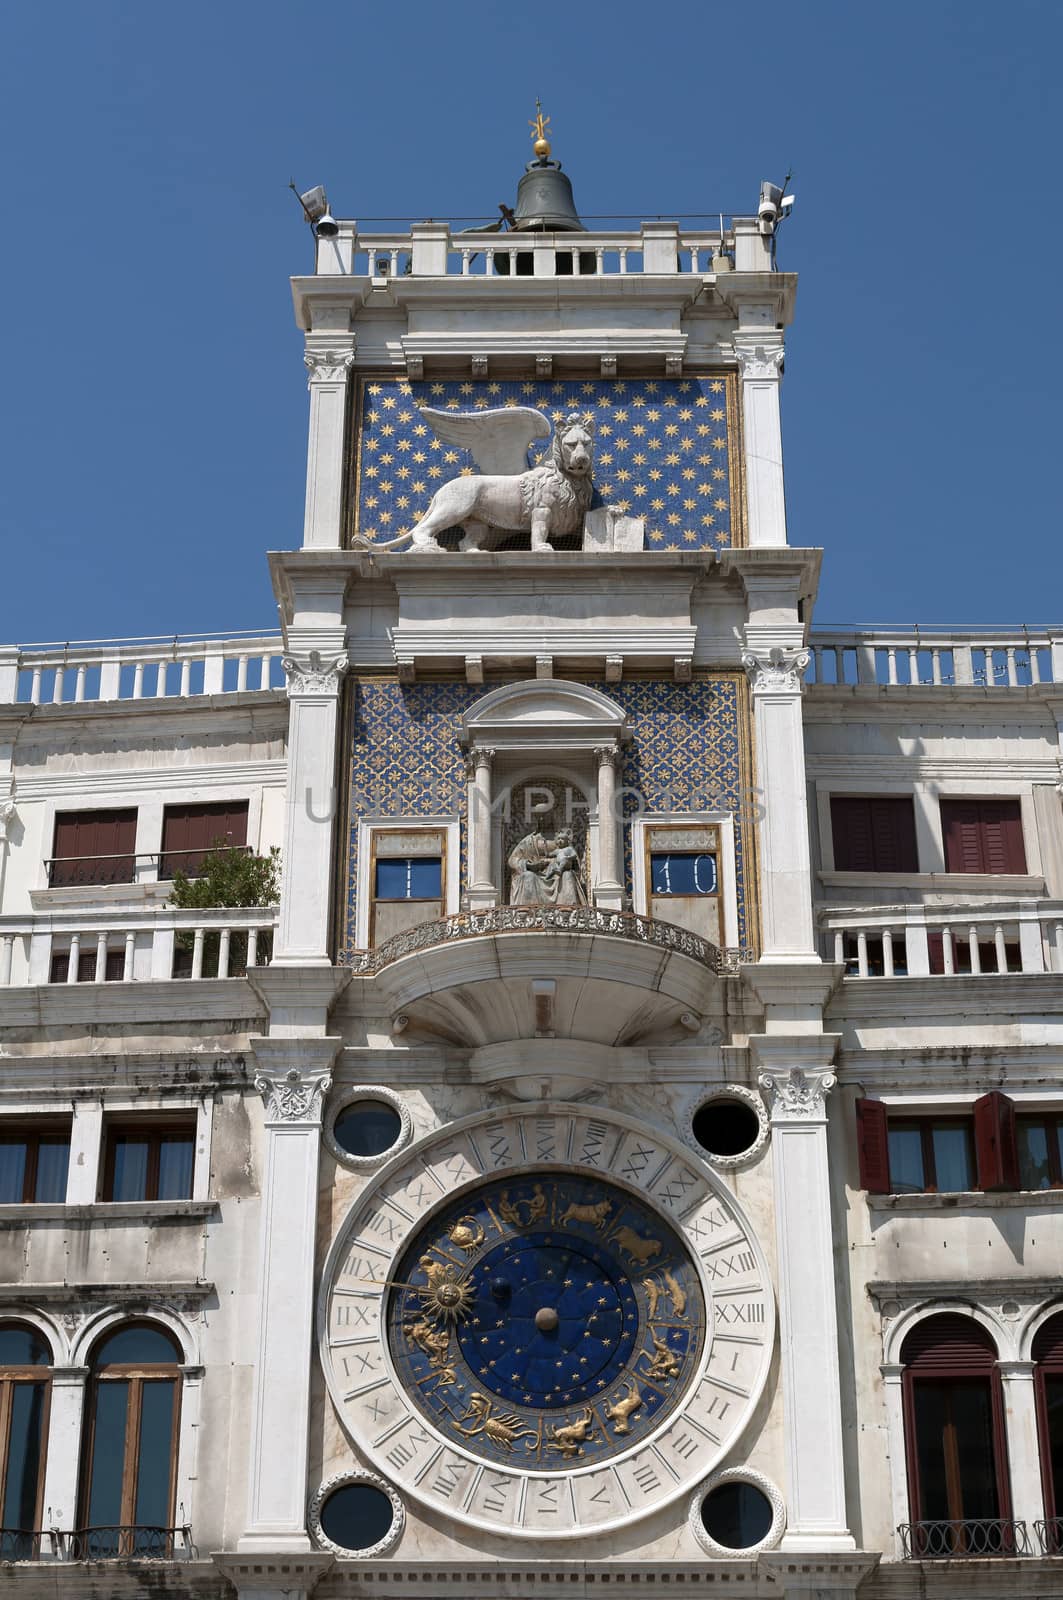 Astronomical clock and Lion of St Mark, Venice, Italy.